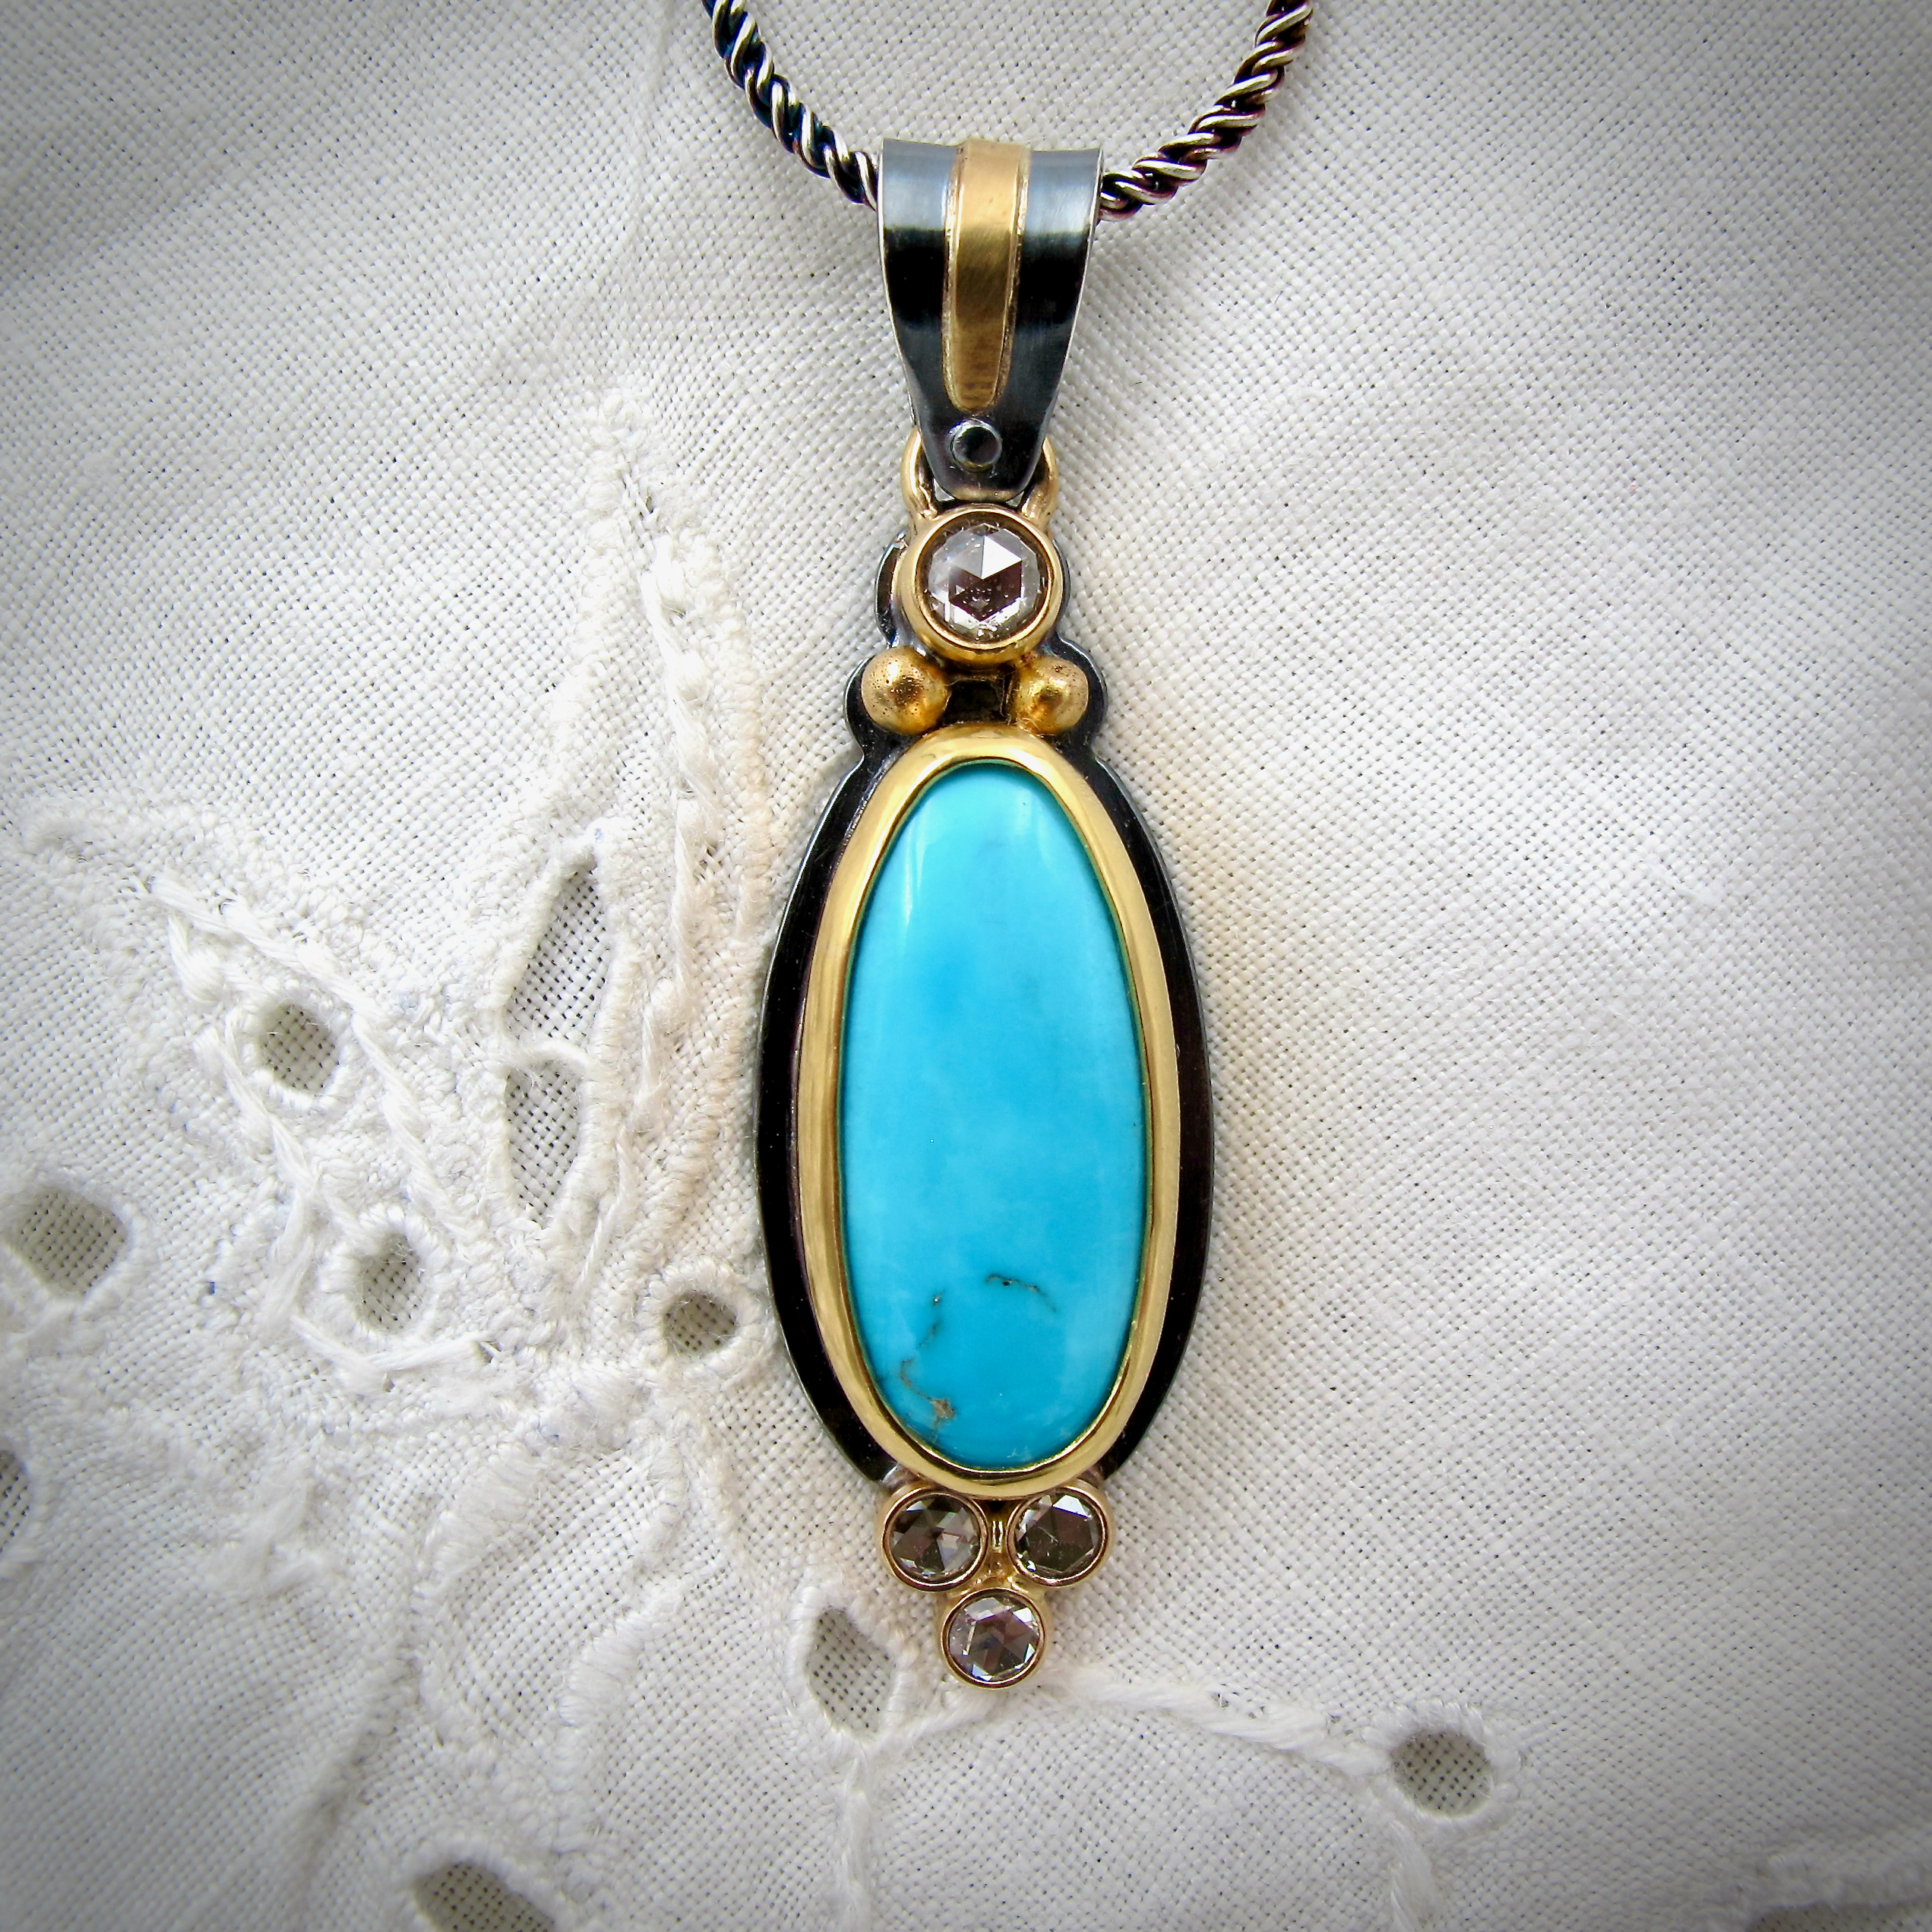 gold, silver, diamonds, rose cut diamonds, turquoise, Castle Dome turquoise, necklace, jewelry